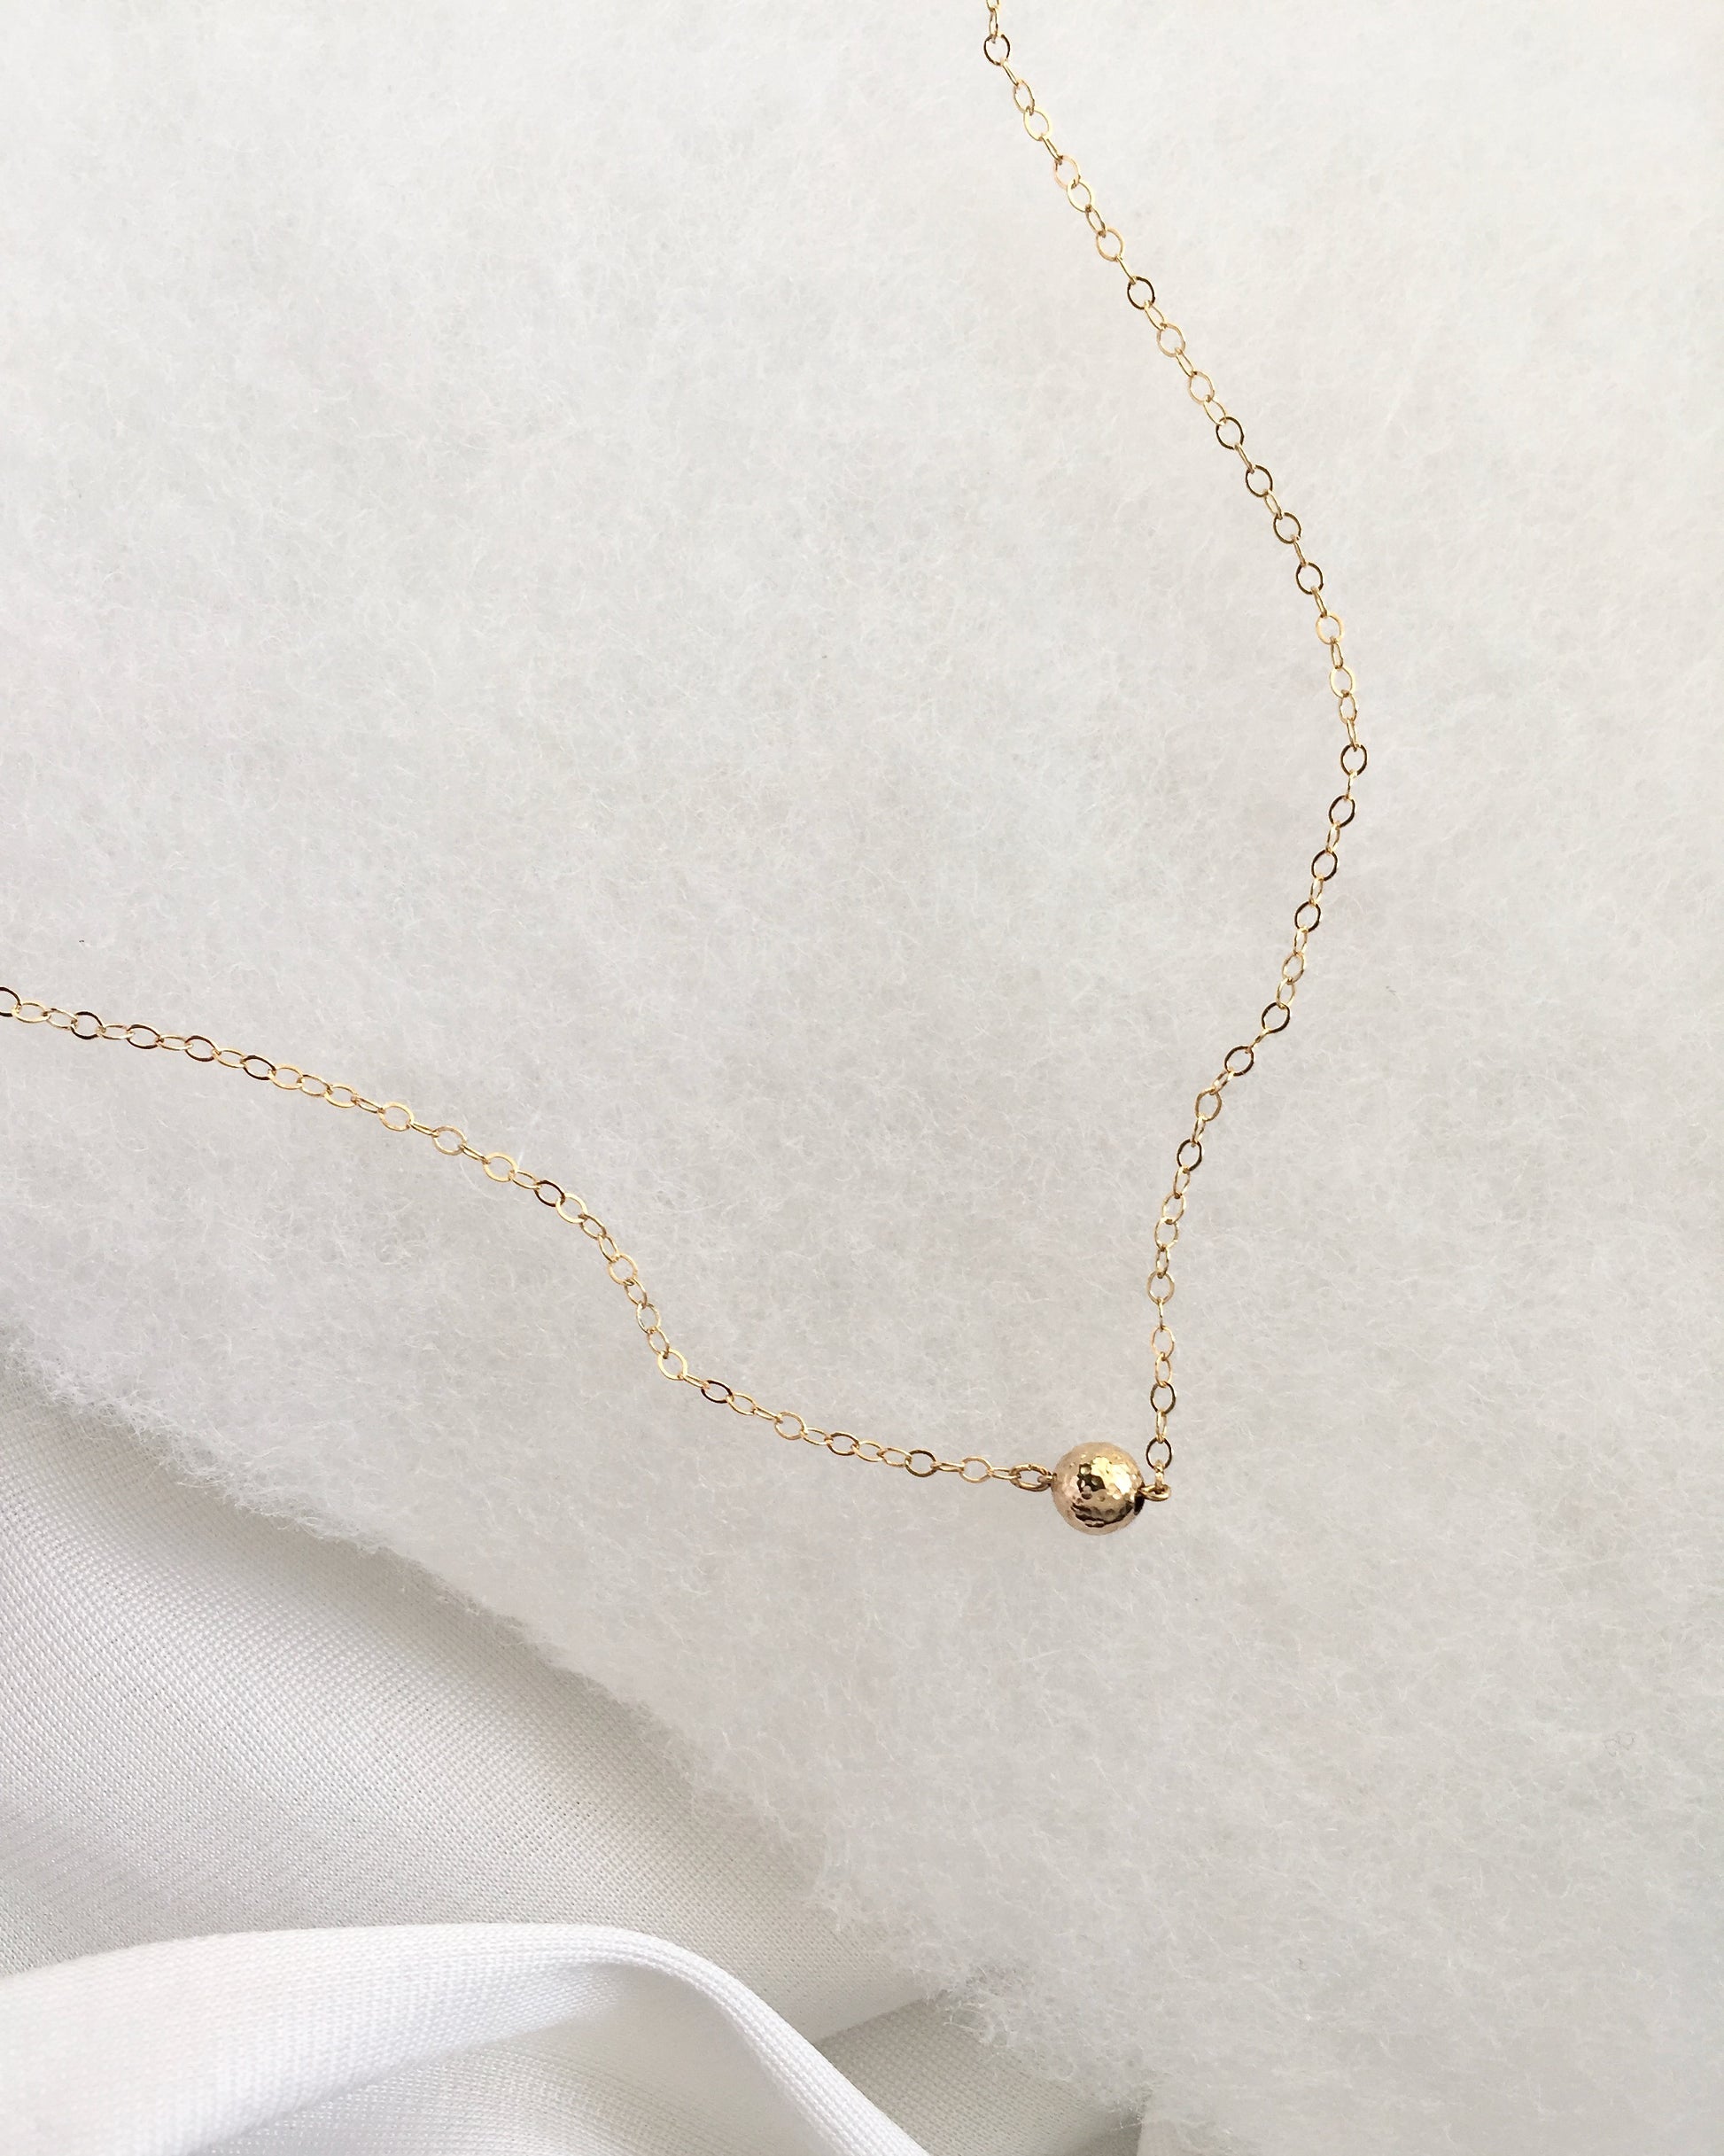 Tiny Gold Ball Necklace | Simple Delicate Short Chain Necklace | IB Jewelry